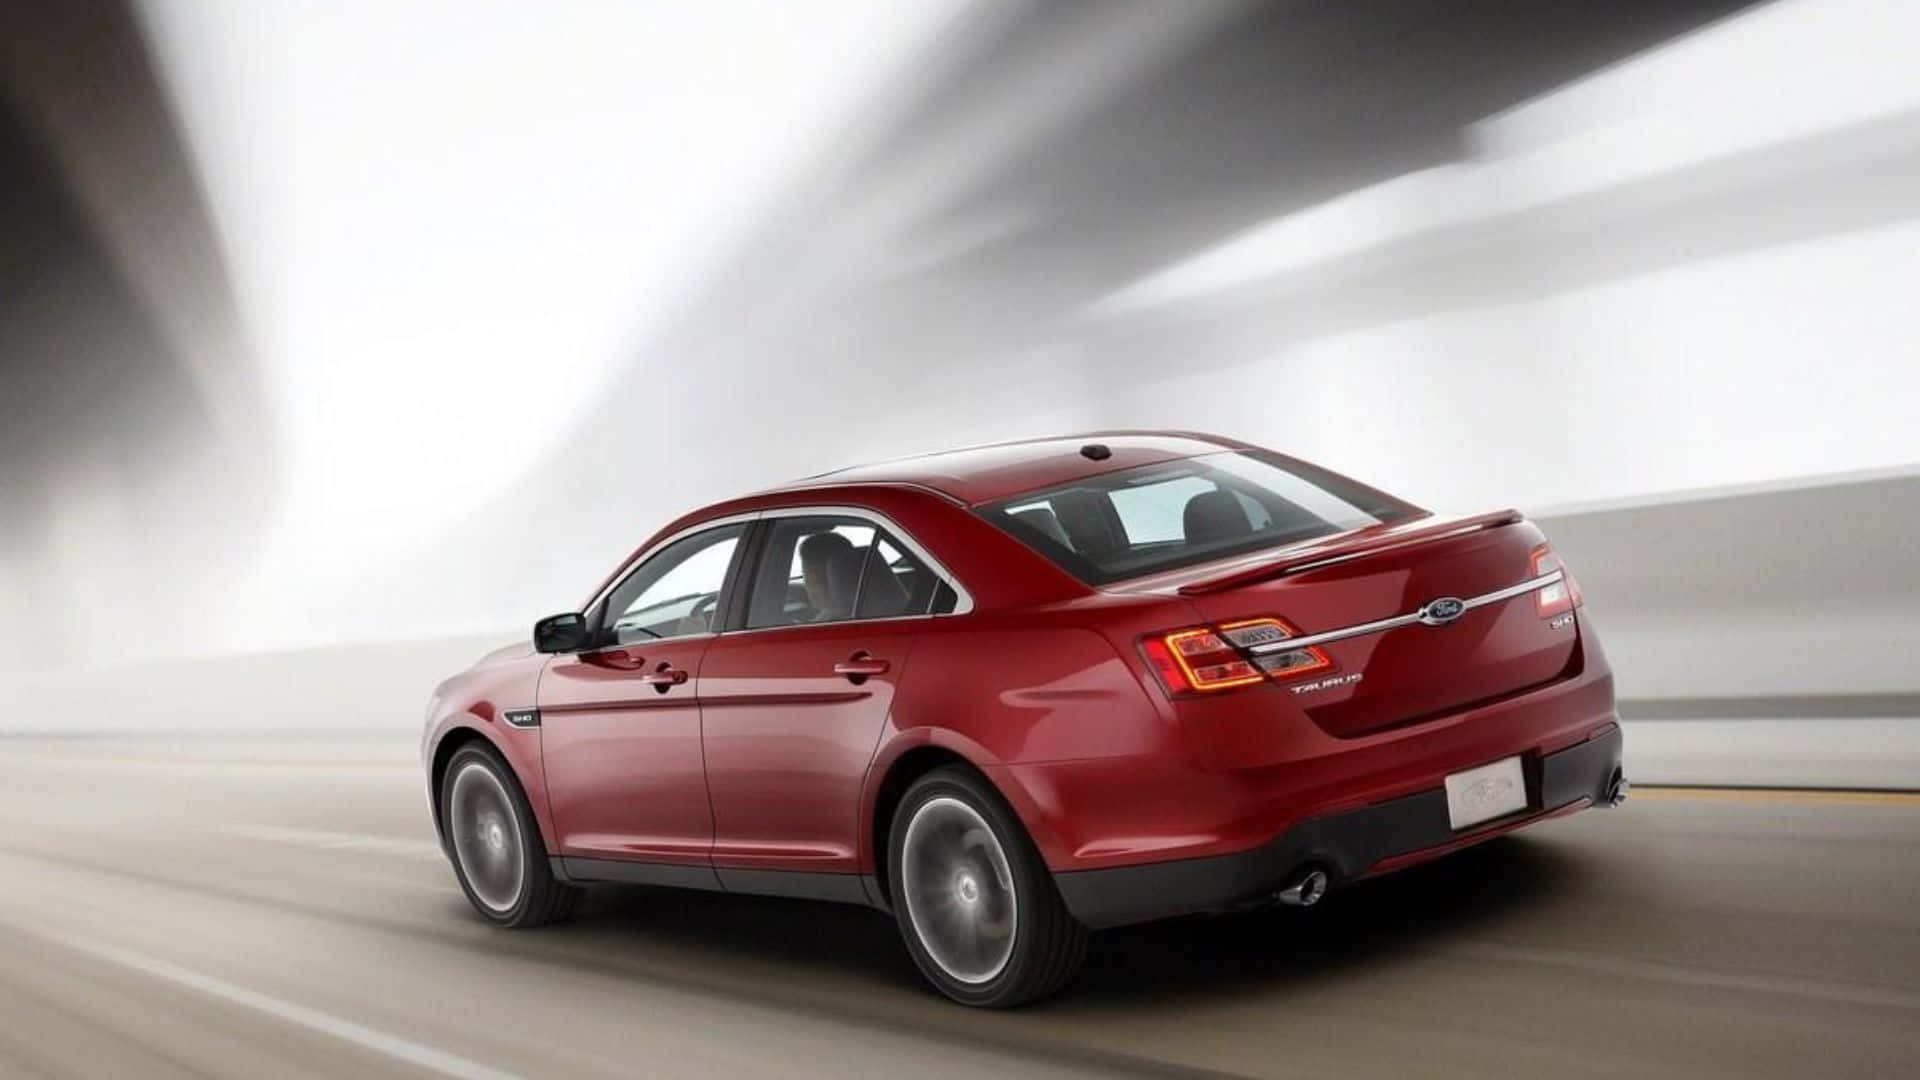 Captivating Ford Taurus in Action Wallpaper